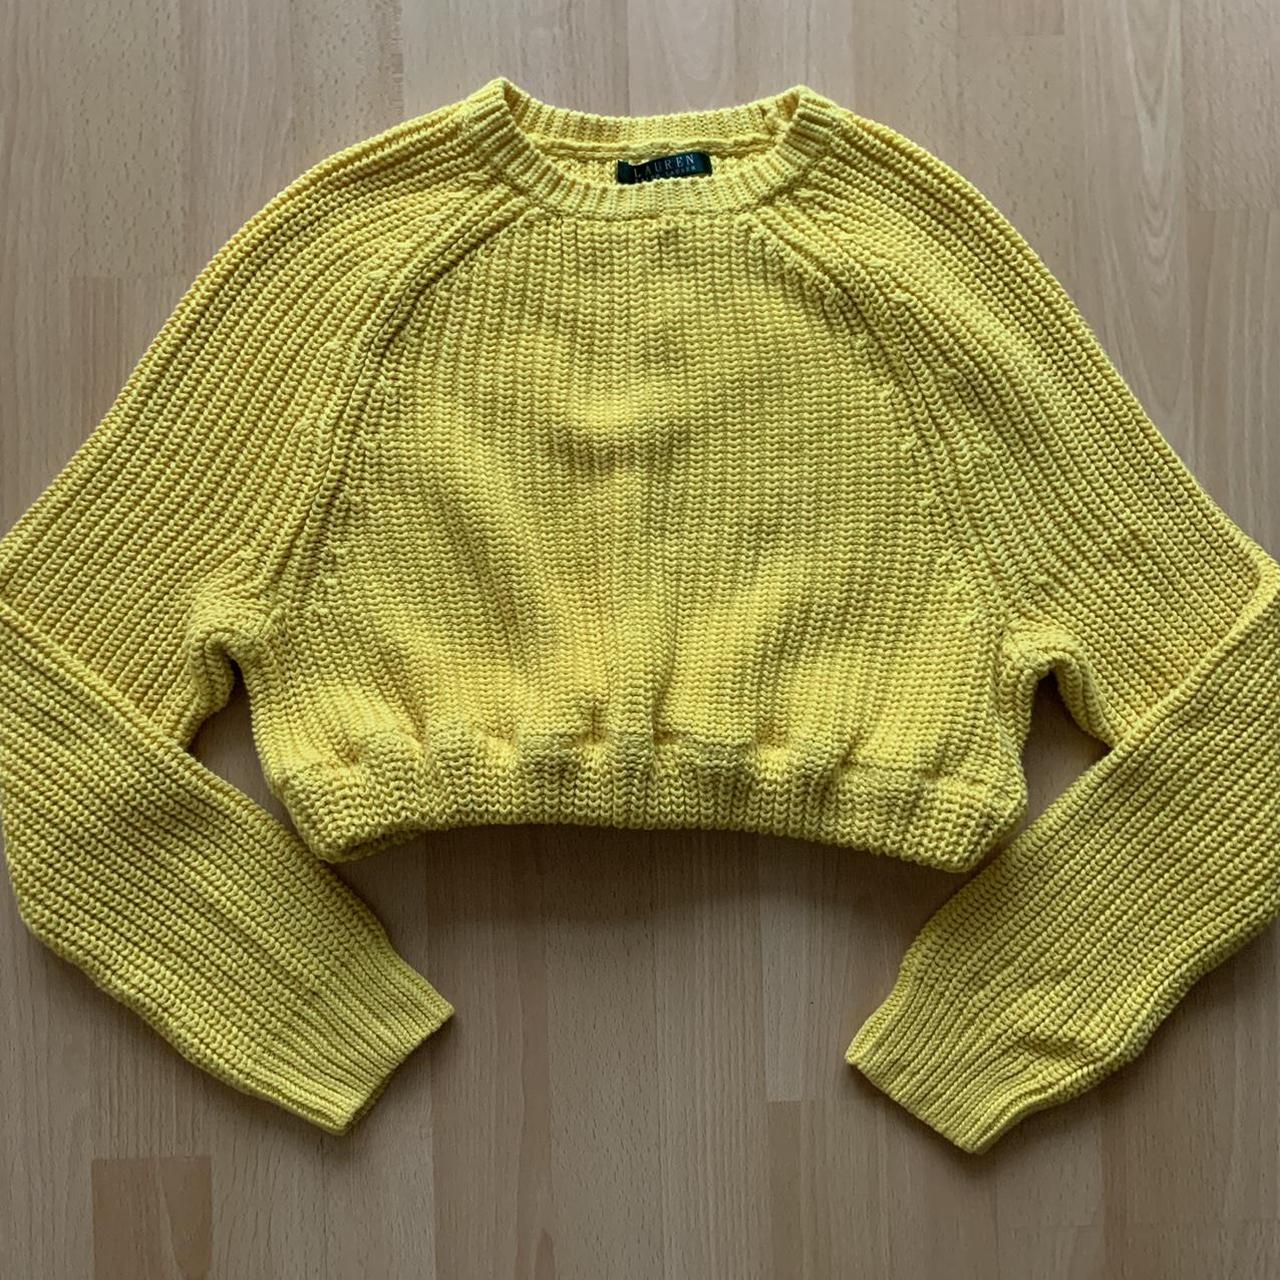 Product Image 2 - Polo Ralph Lauren yellow sweater